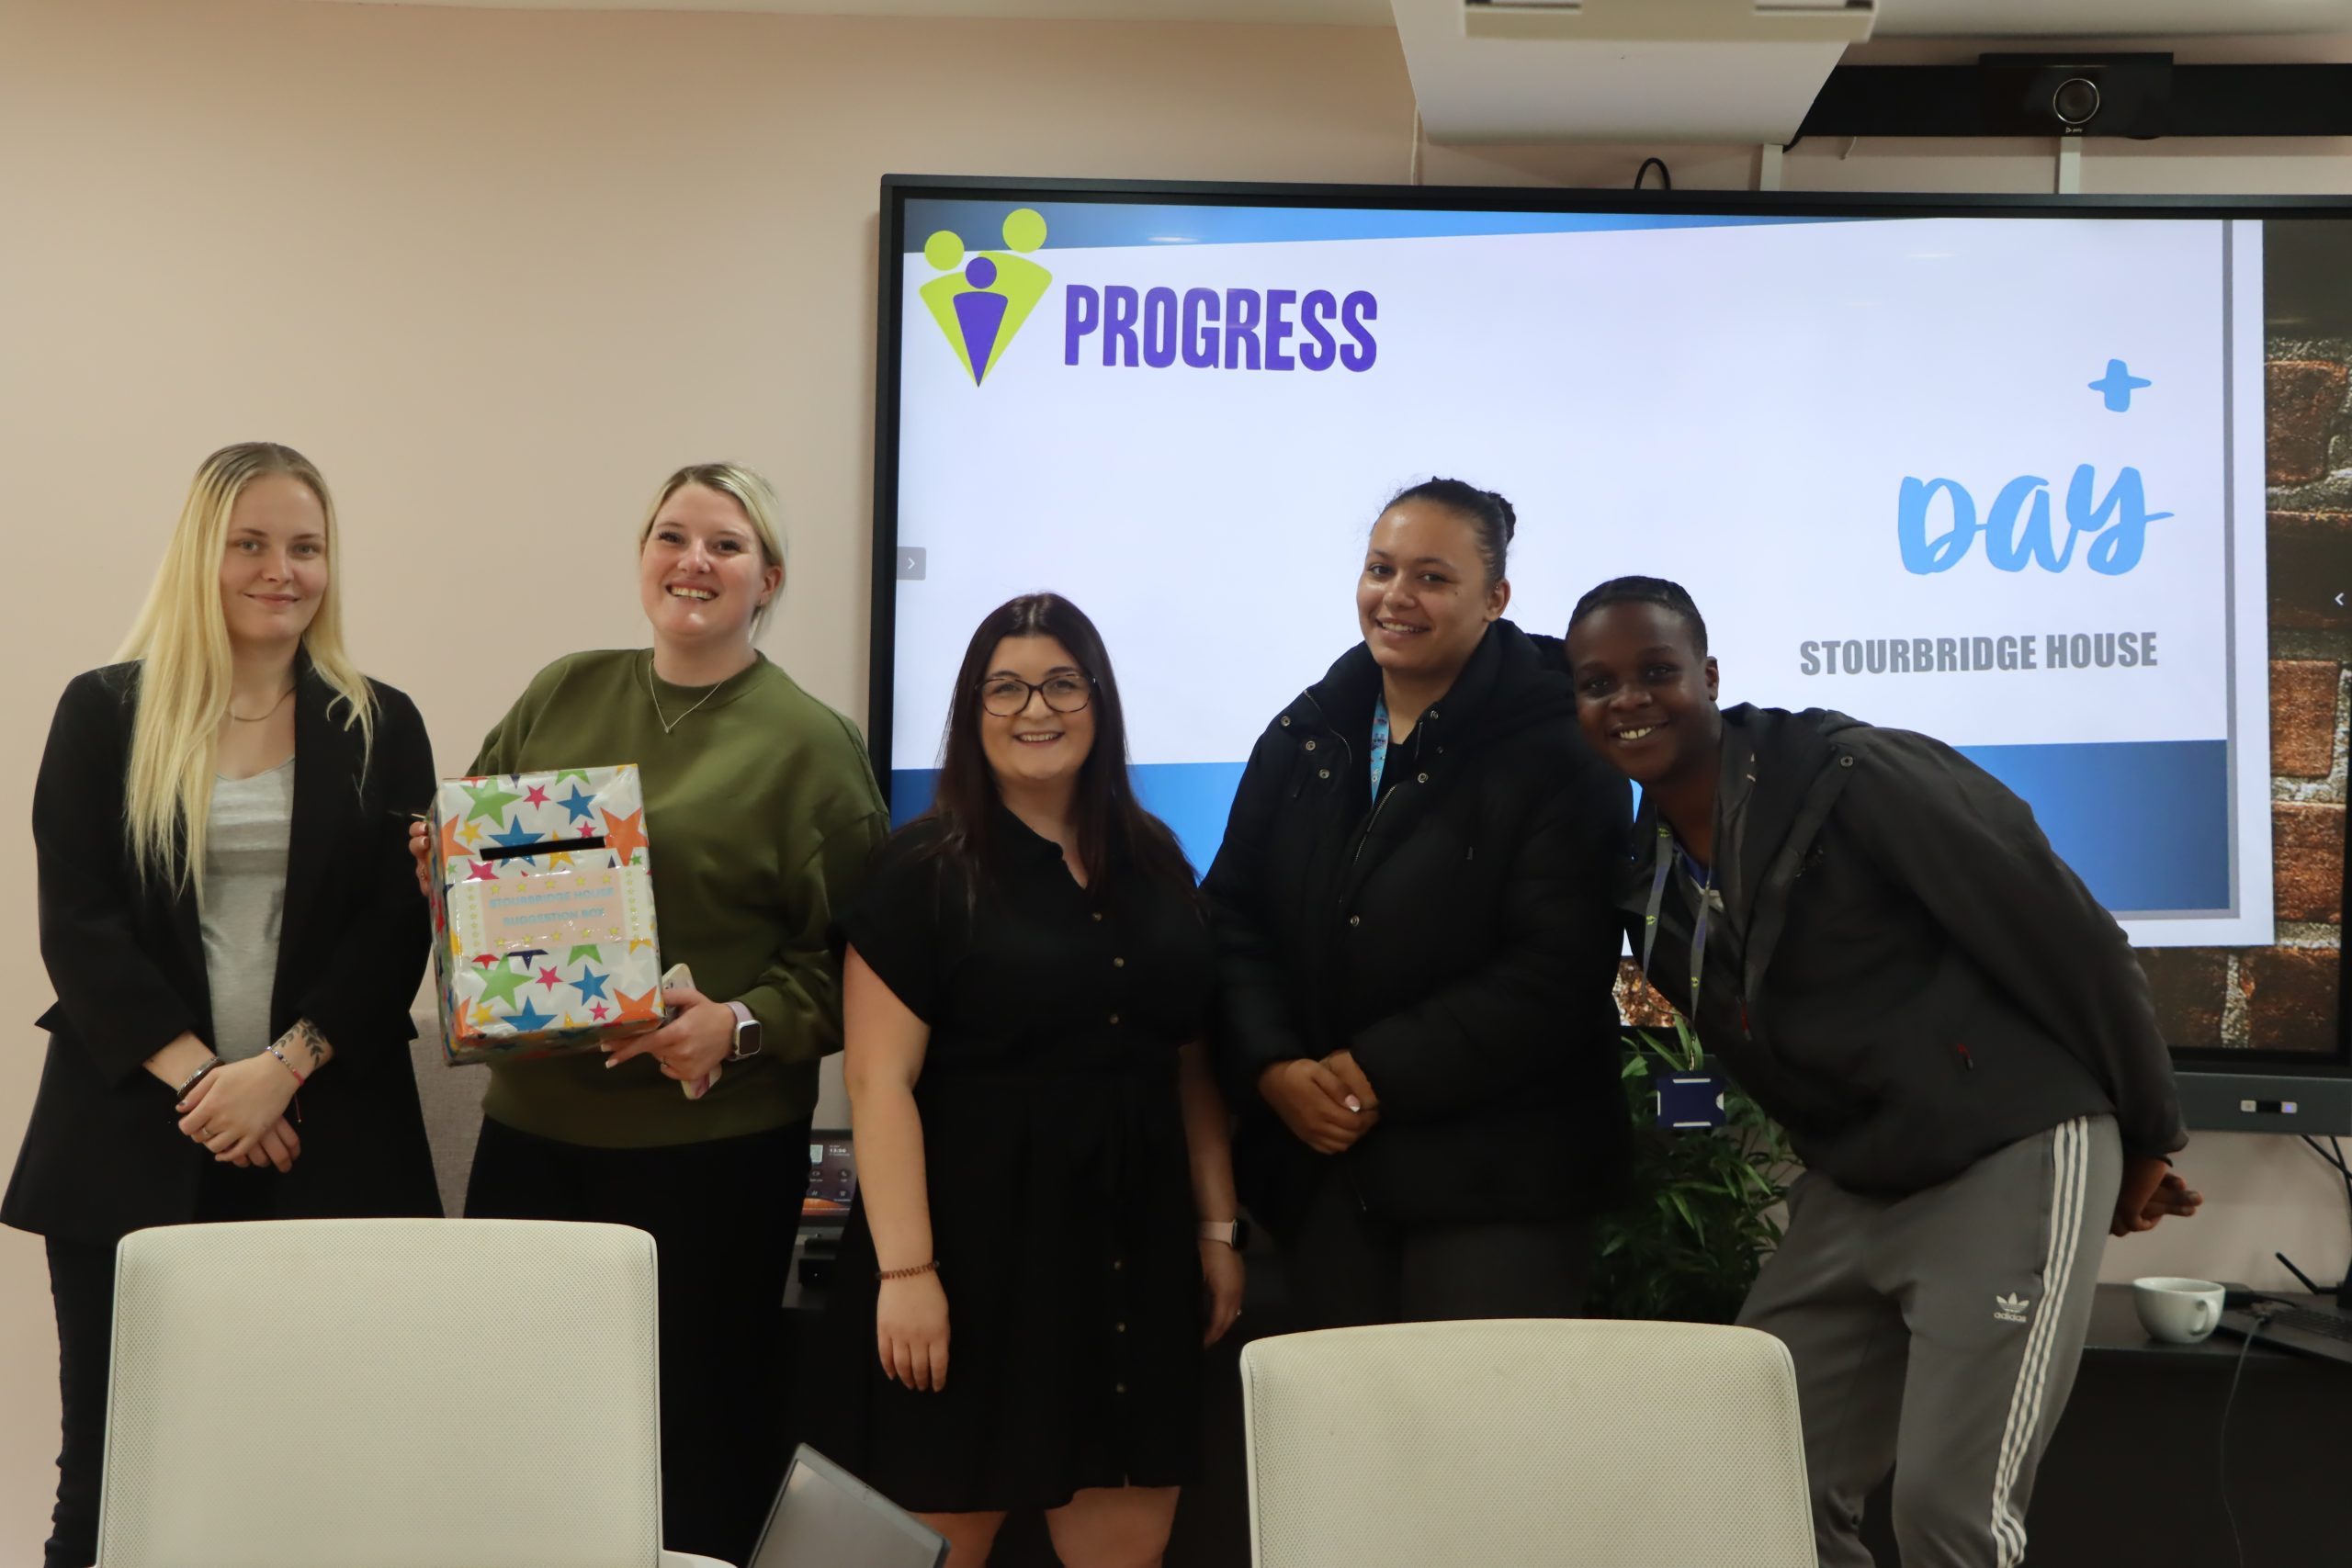 Progress Celebrates Parents and Builds Community at Successful Parents’ Day Event